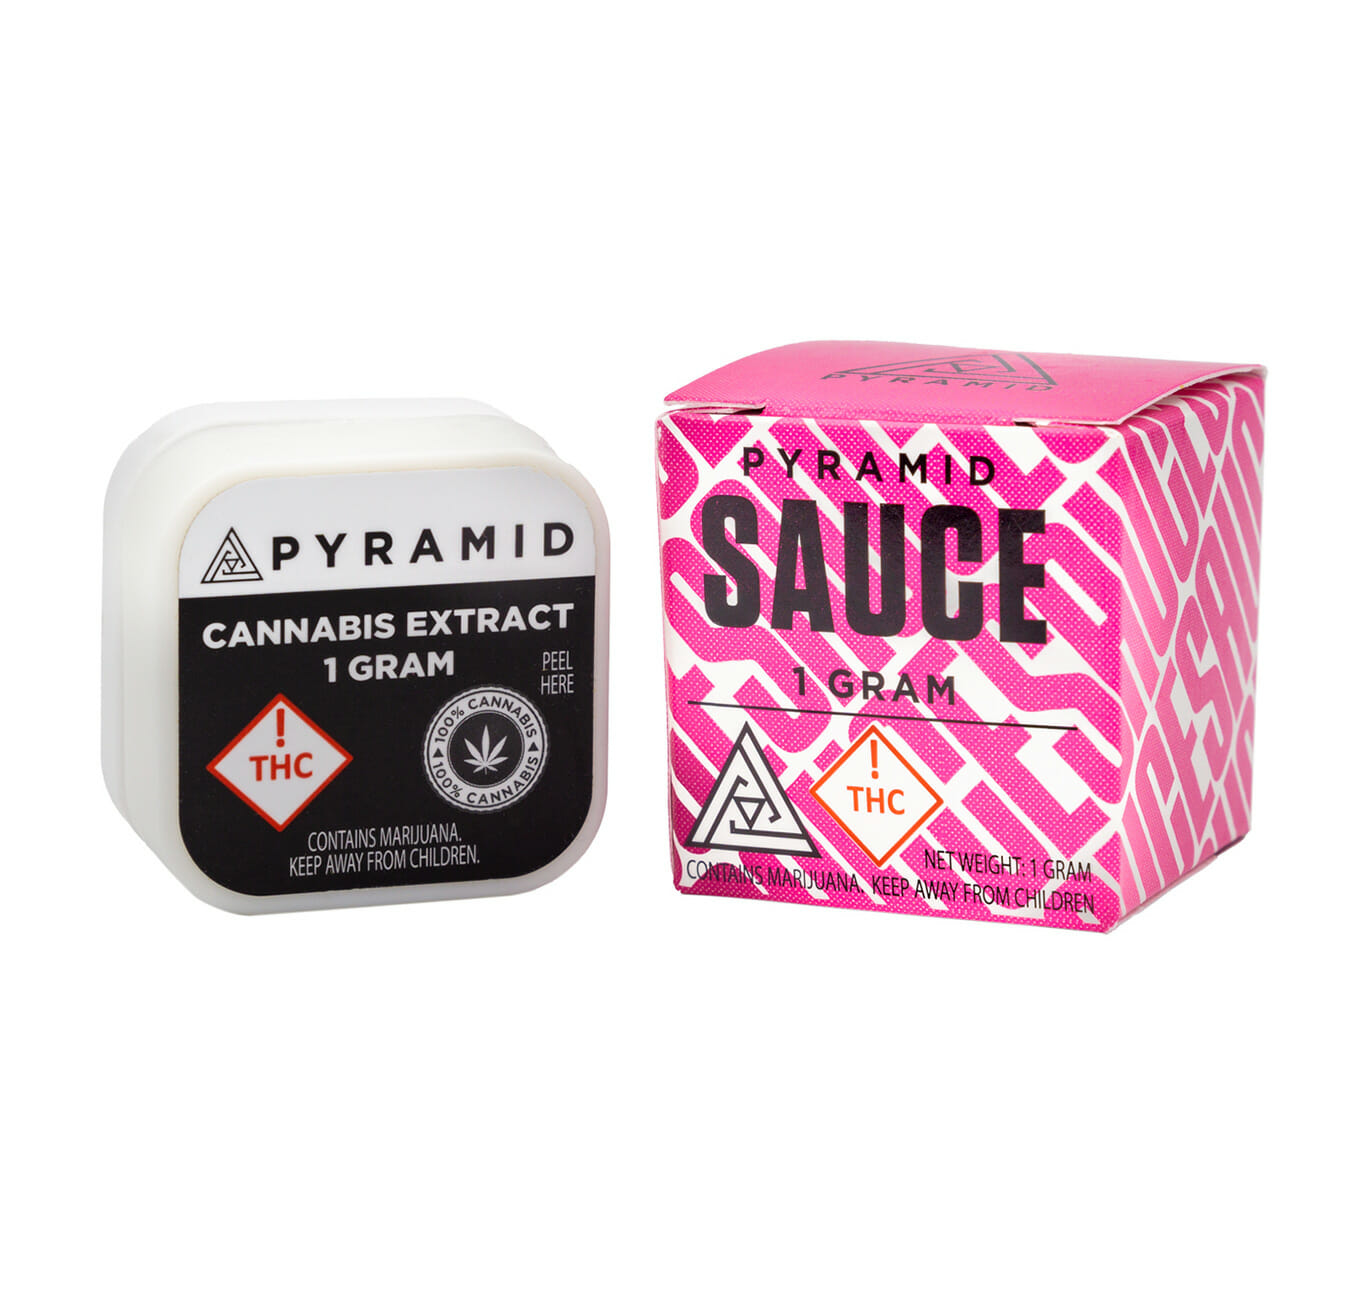 Pyramid Sauce Concentrate